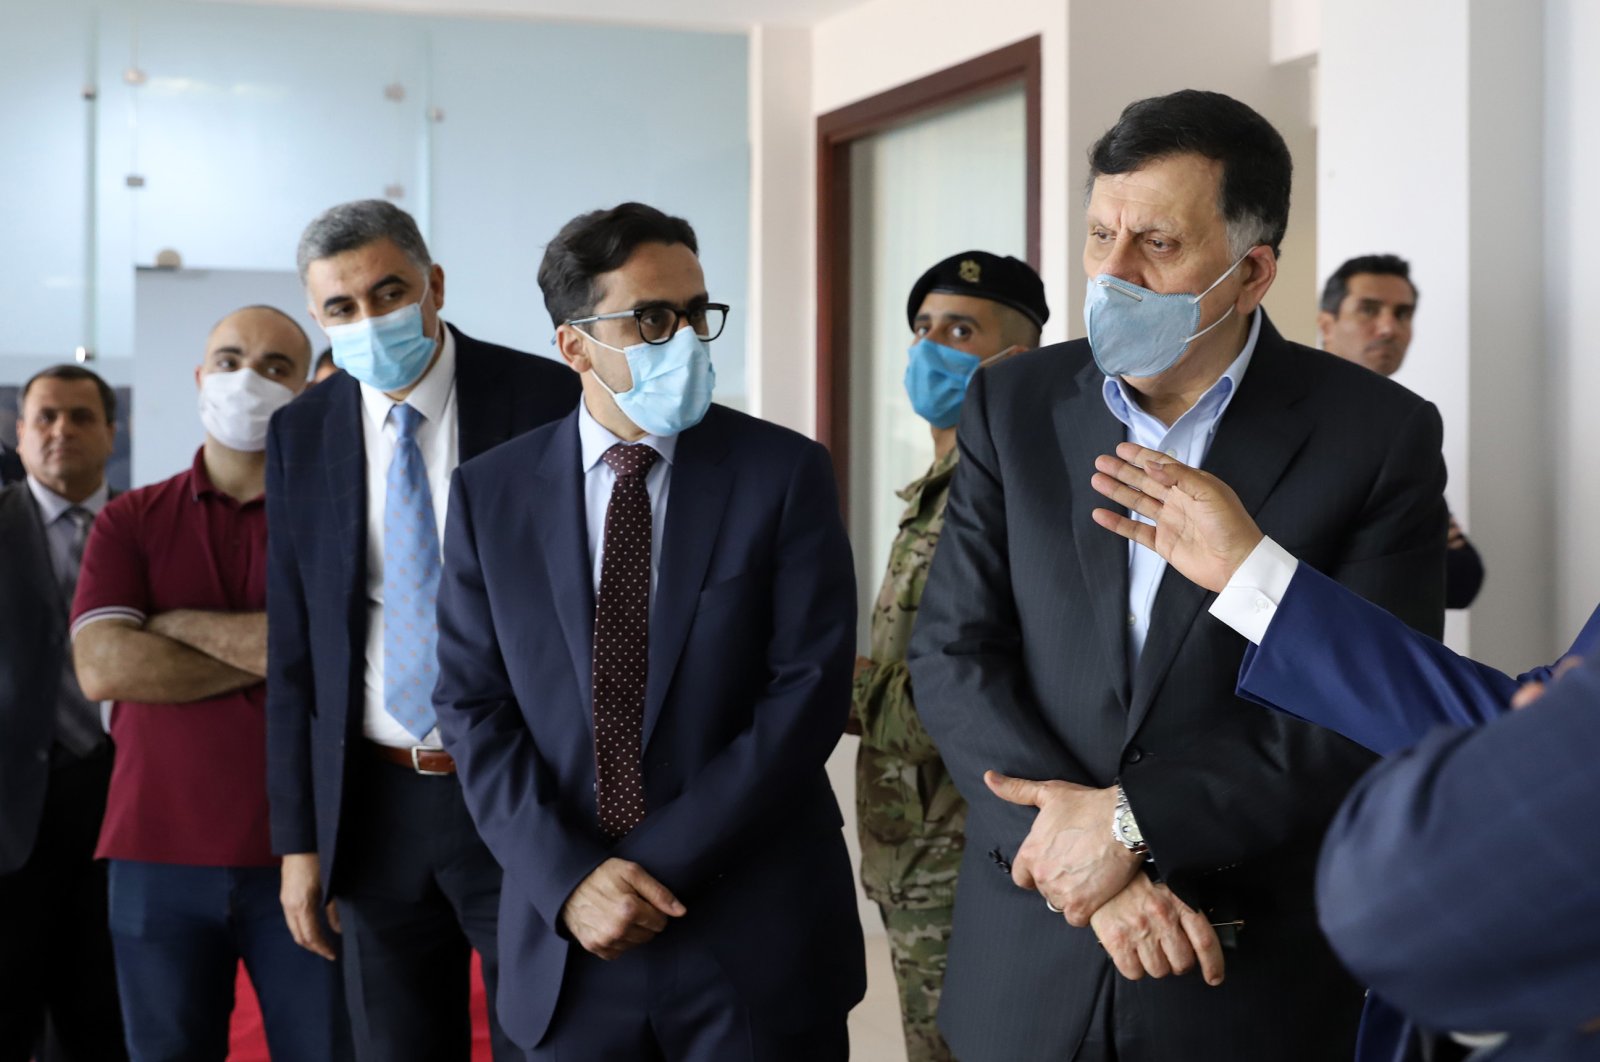 Fayez al-Sarraj (R), prime minister of Libya's U.N.-recognized Government of National Accord (GNA), visits a COVID-19 response center in the capital Tripoli, Libya, May 4, 2020. (AFP Photo )